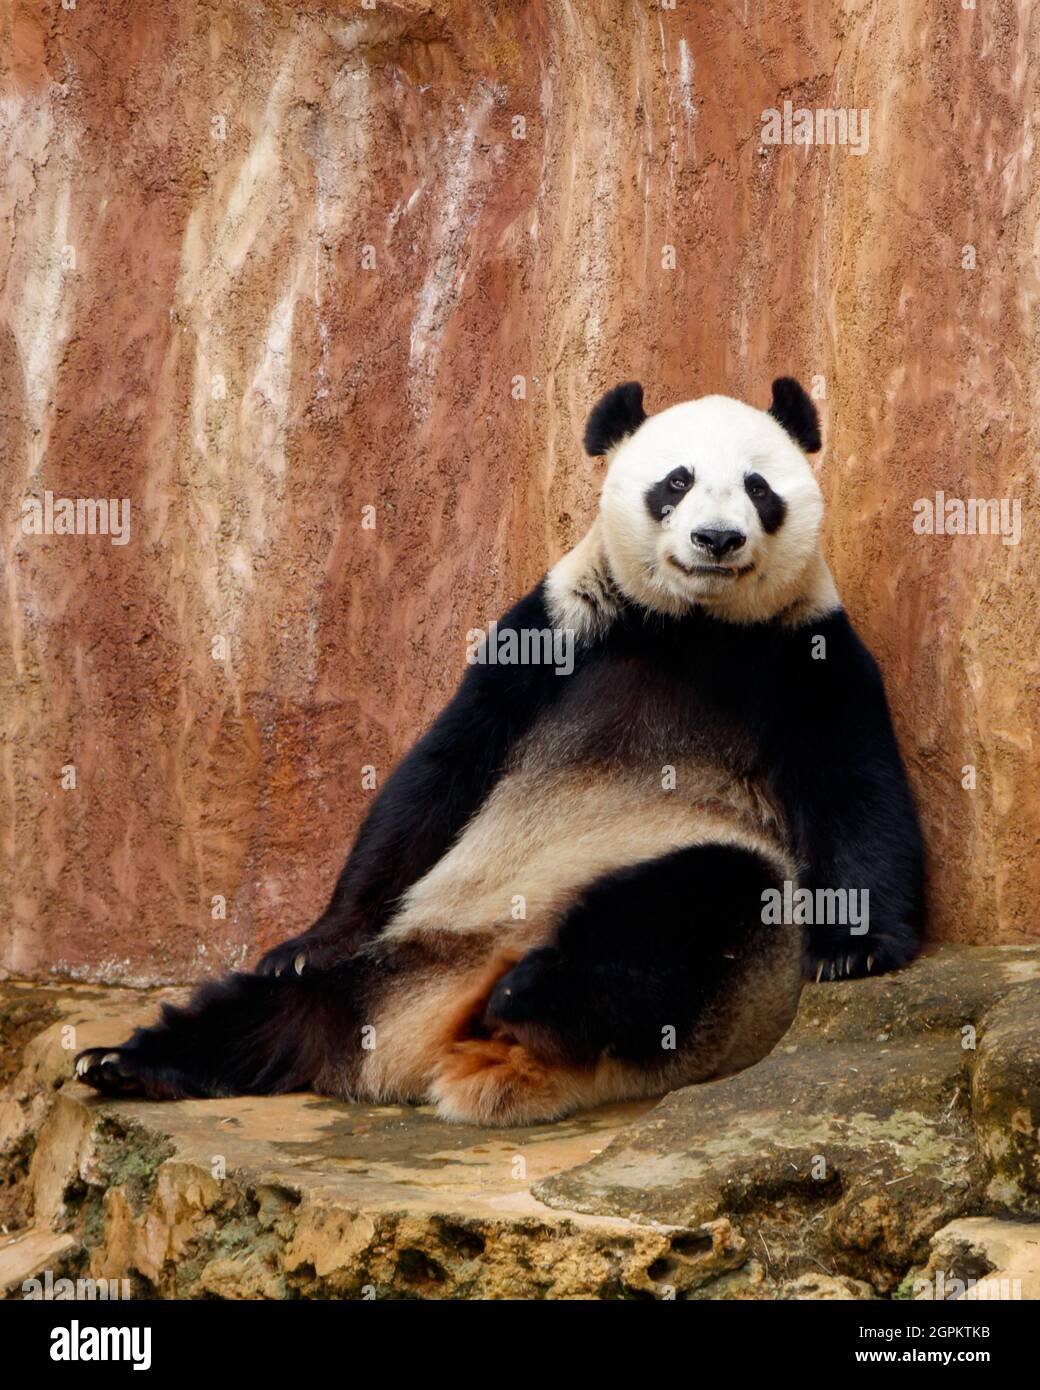 A giant panda (Ailuropoda melanoleuca) sits and rests enjoying the afternoon. Stock Photo